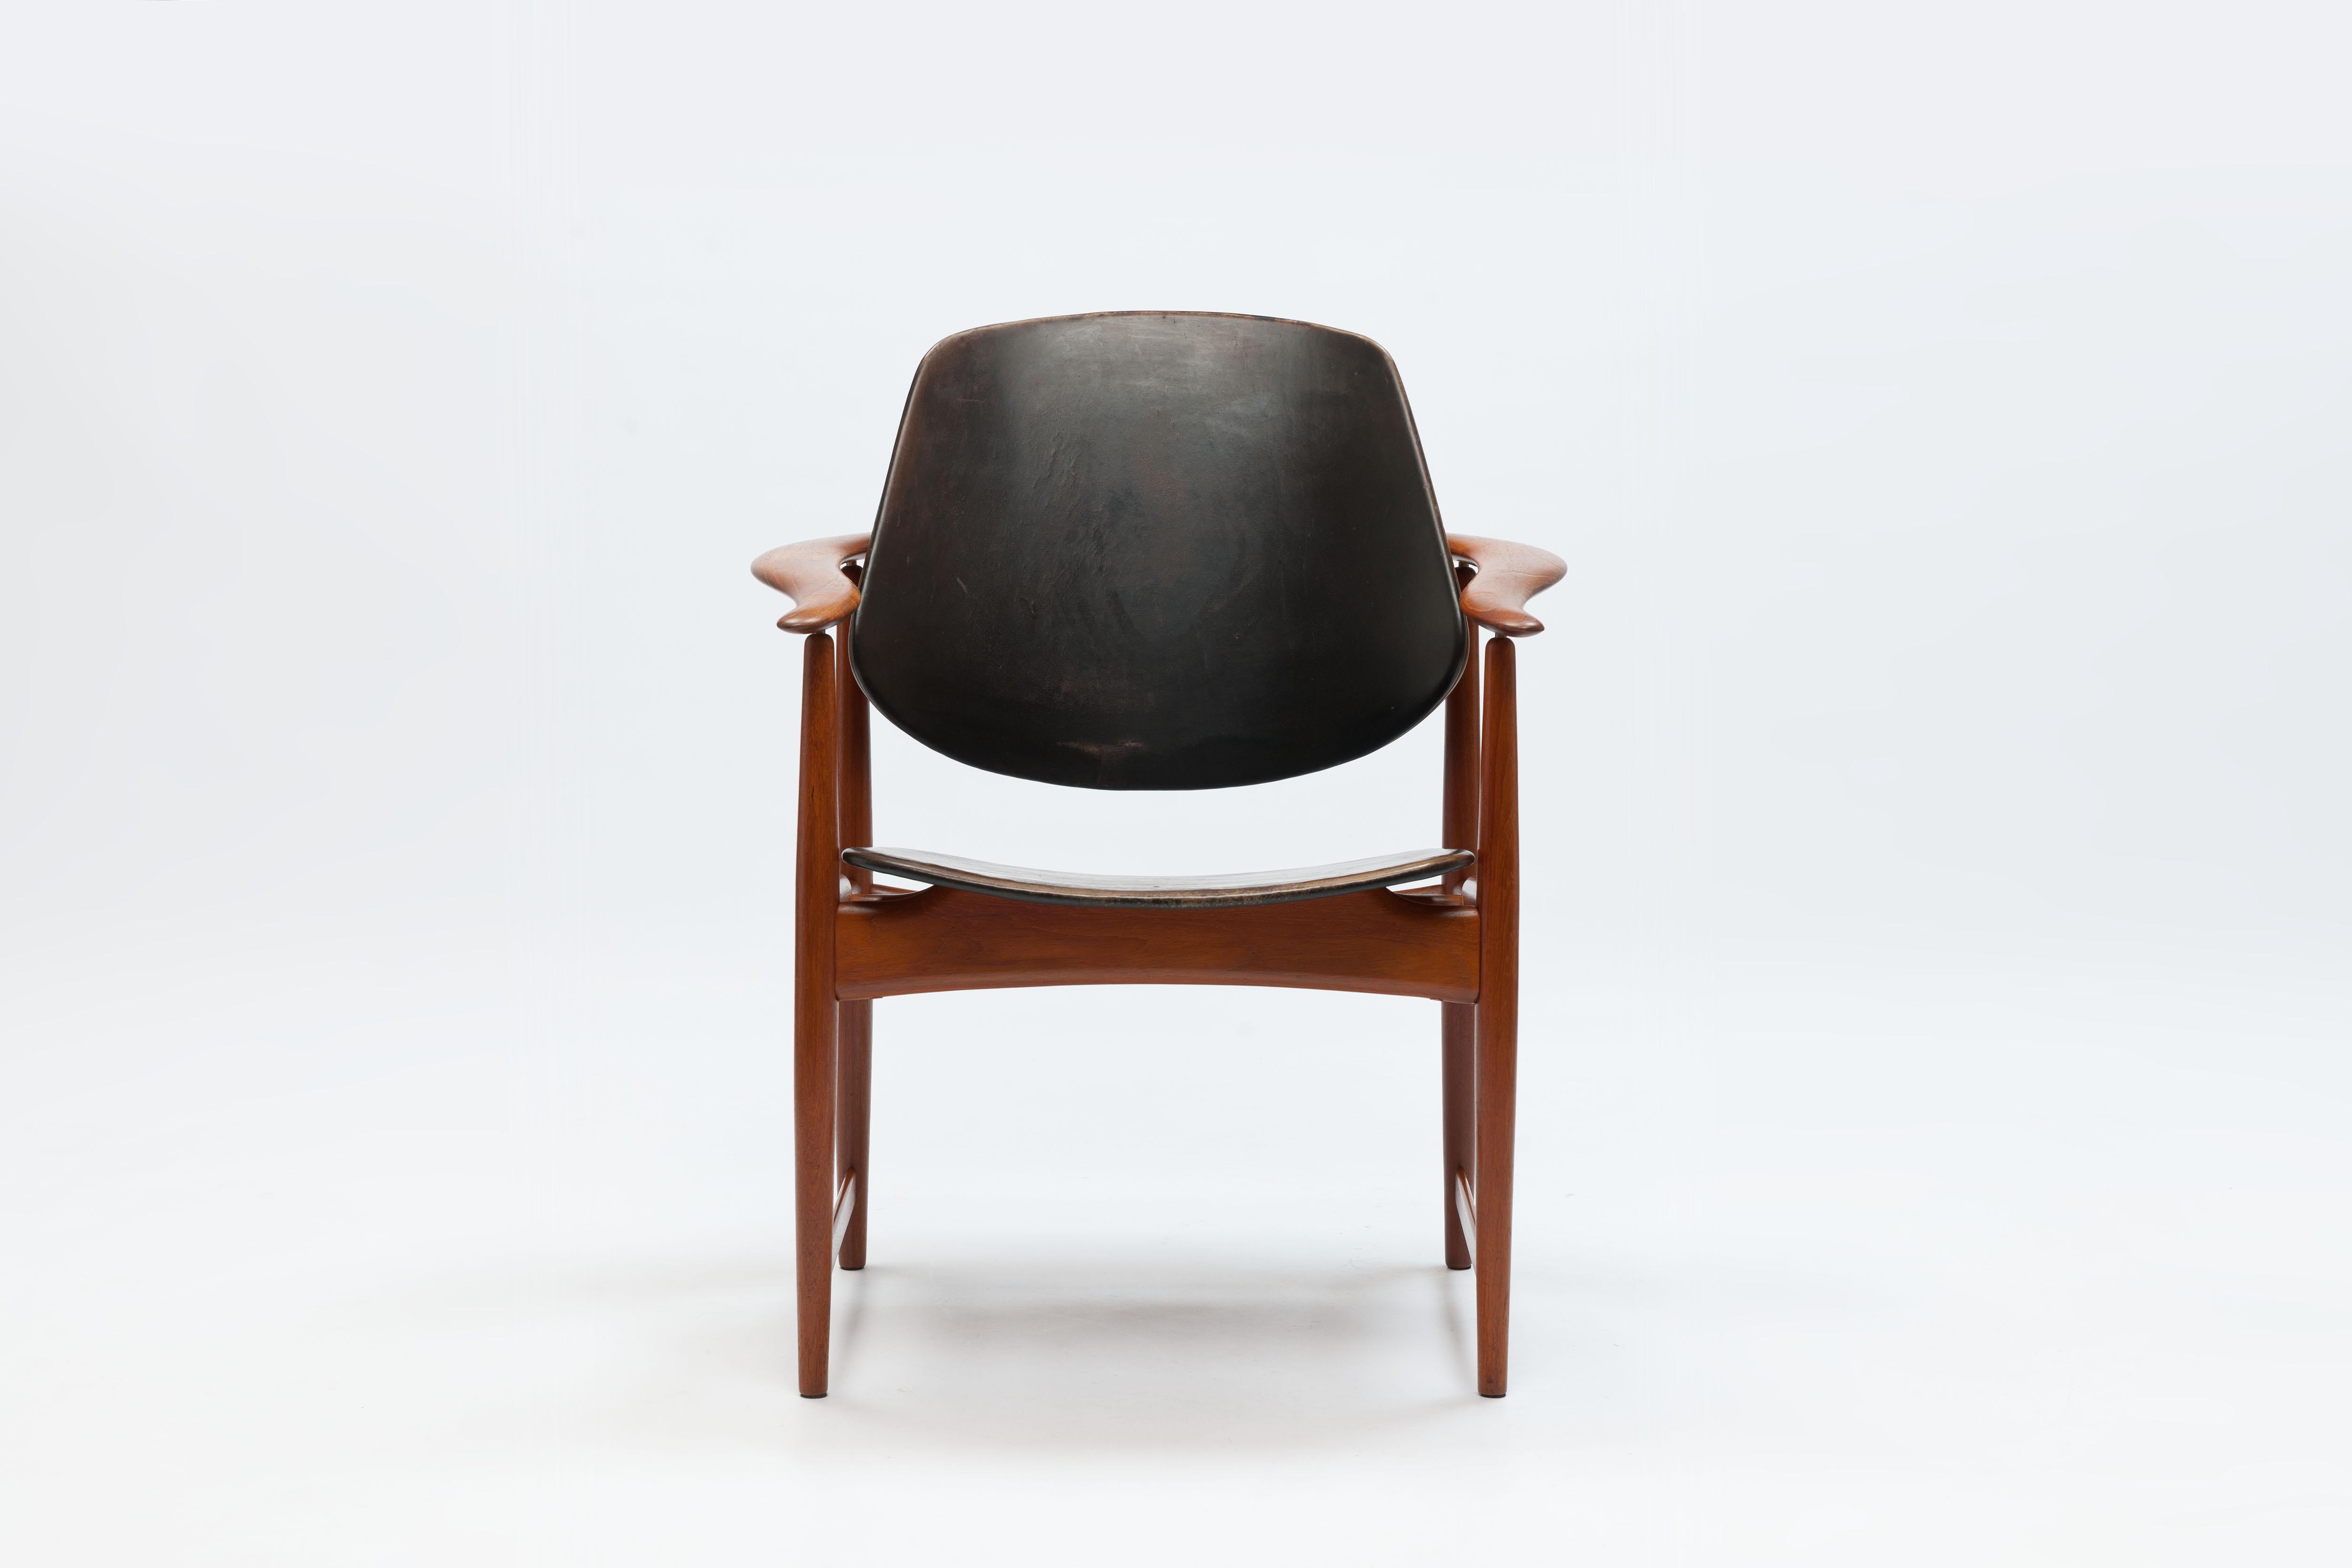 Beautiful larger chair with 'wraparound' armrests made of teak & leather designed by the Danish designer Arne Hovmand-Olsen (1919-1989) in 1960. 
Plywood was used for the wide backrest supported by a brass spacer that underlines the open character